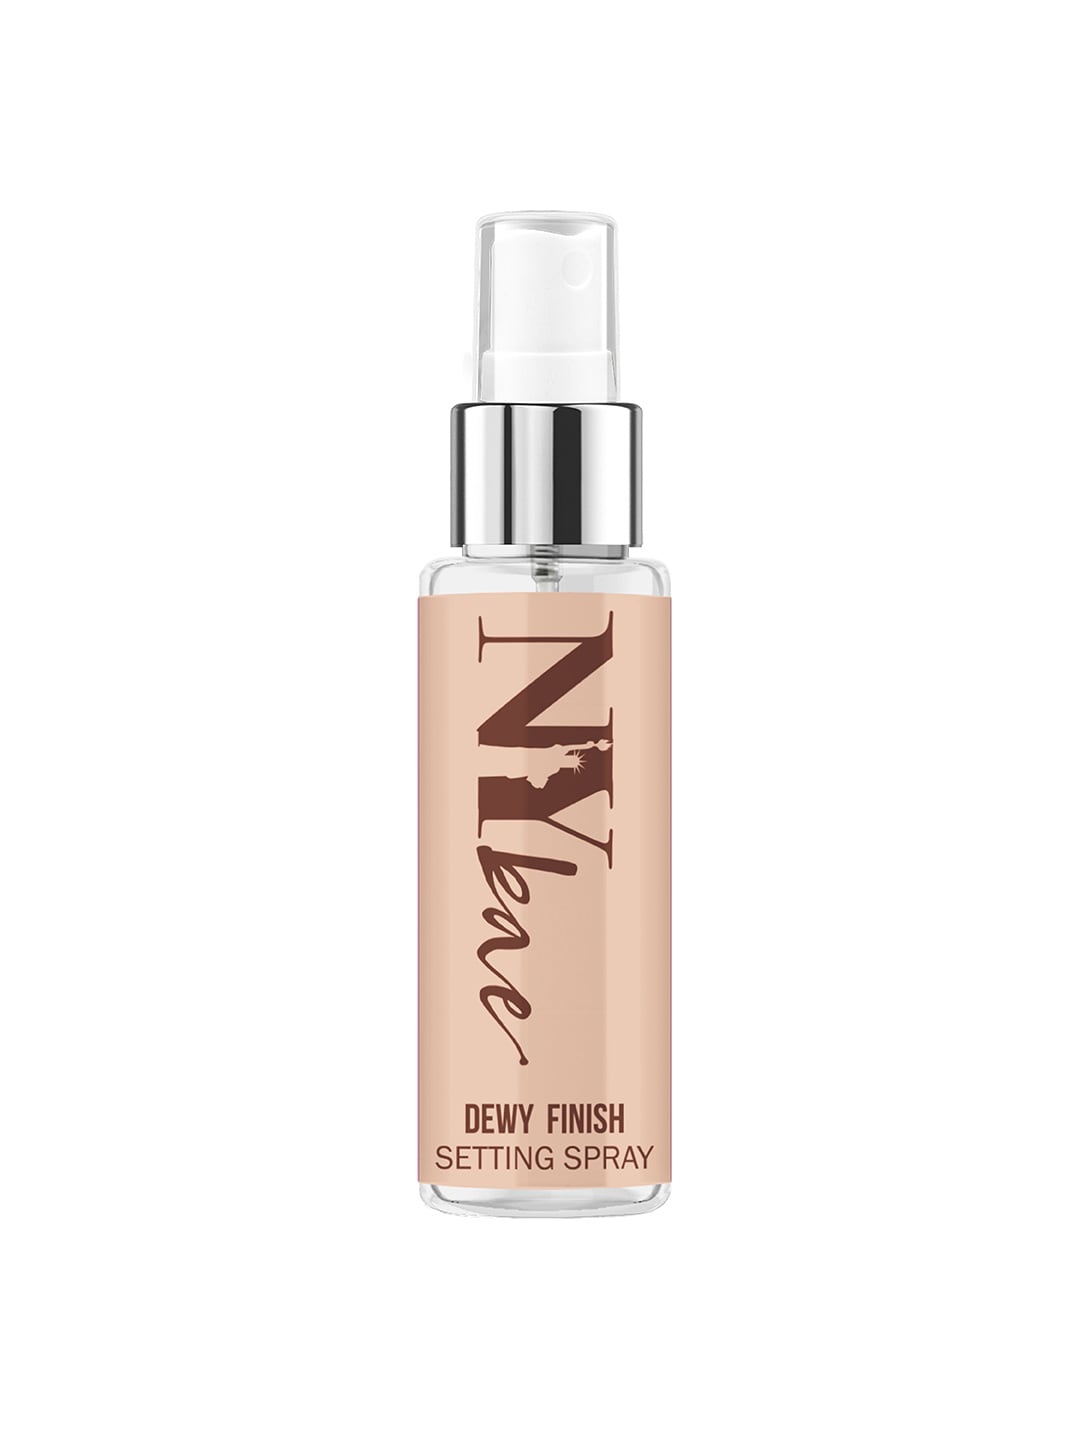 NY Bae Dewy Finish Makeup Setting Spray - 50 ml Price in India